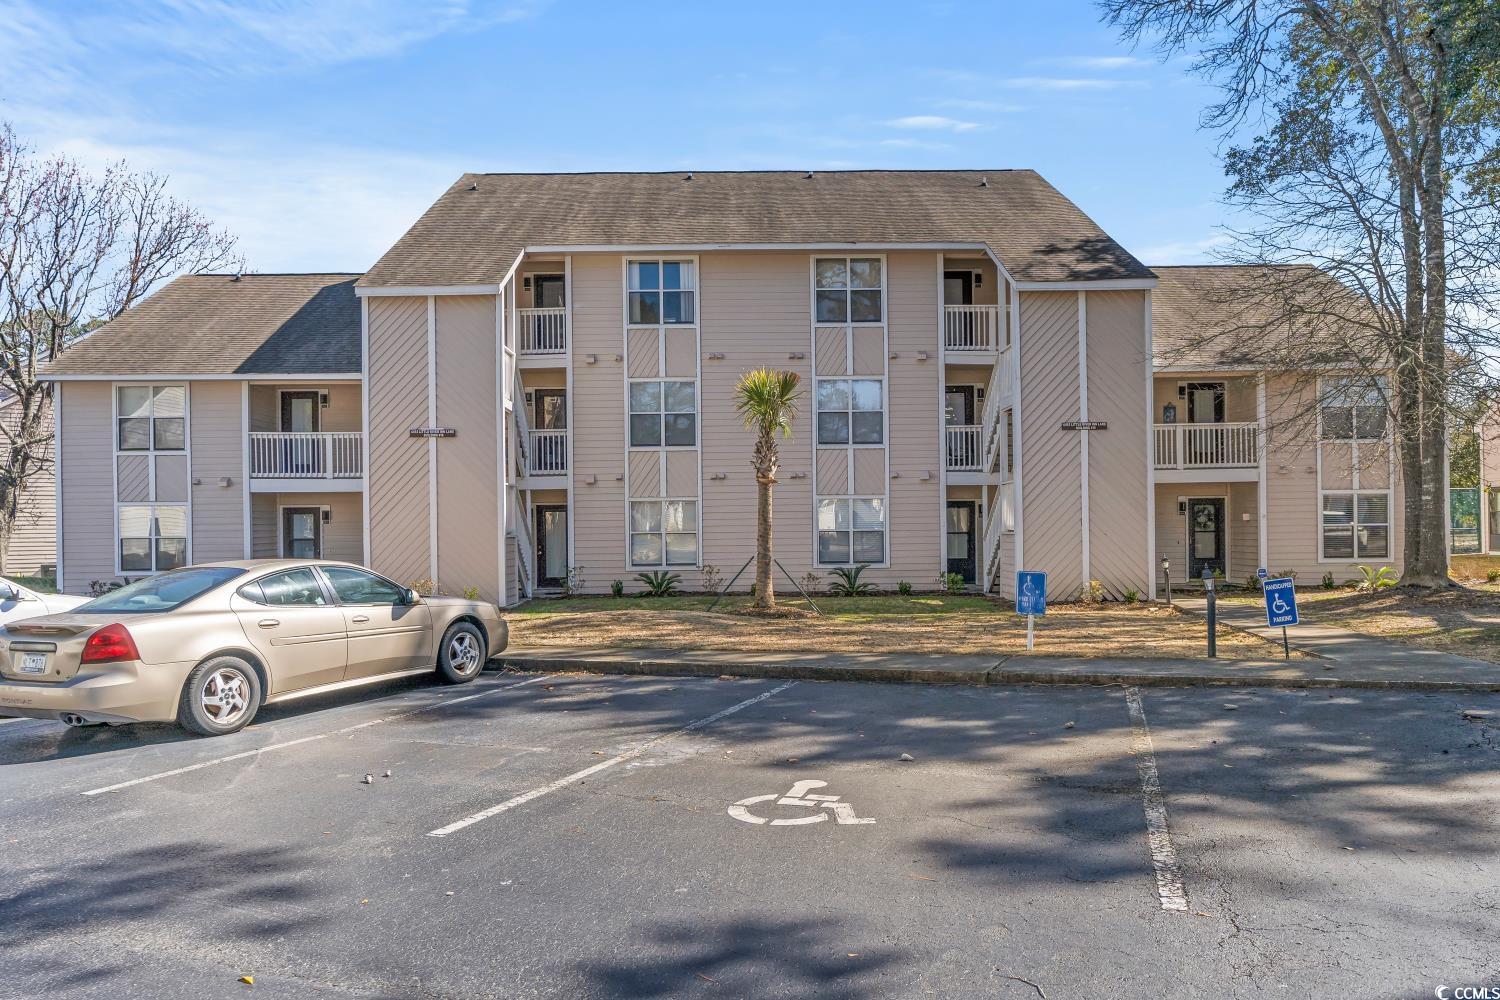 don't miss this fully furnished- first floor, 2 bedroom 2 bathroom condo in the quiet community, little river inn resort. this unit is move-in or rental-ready featuring updated lvp flooring in the kitchen & foyer, upgraded cabinetry, and an open window connecting the kitchen with the dining & living areas. the kitchen is equipped with all appliances including a stainless steel fridge! washer/dryer included with sale for added convenience, and hvac approx 5 years old. enjoy afternoons on the screened in patio, just a few steps to the tennis courts, the grills, and picnic table! little river inn resort offers an outdoor pool, hot tub, tennis courts, play area, picnic and grilling areas, and more. lifequest fitness center and spa is located within the same community! conveniently located close to schools, grocery stores, mcleod medical center, and near all of the grand strand's finest dining, shopping, and entertainment attractions. whether you are looking for an investment opportunity or your forever home, you won't want to miss this. schedule your showing today!